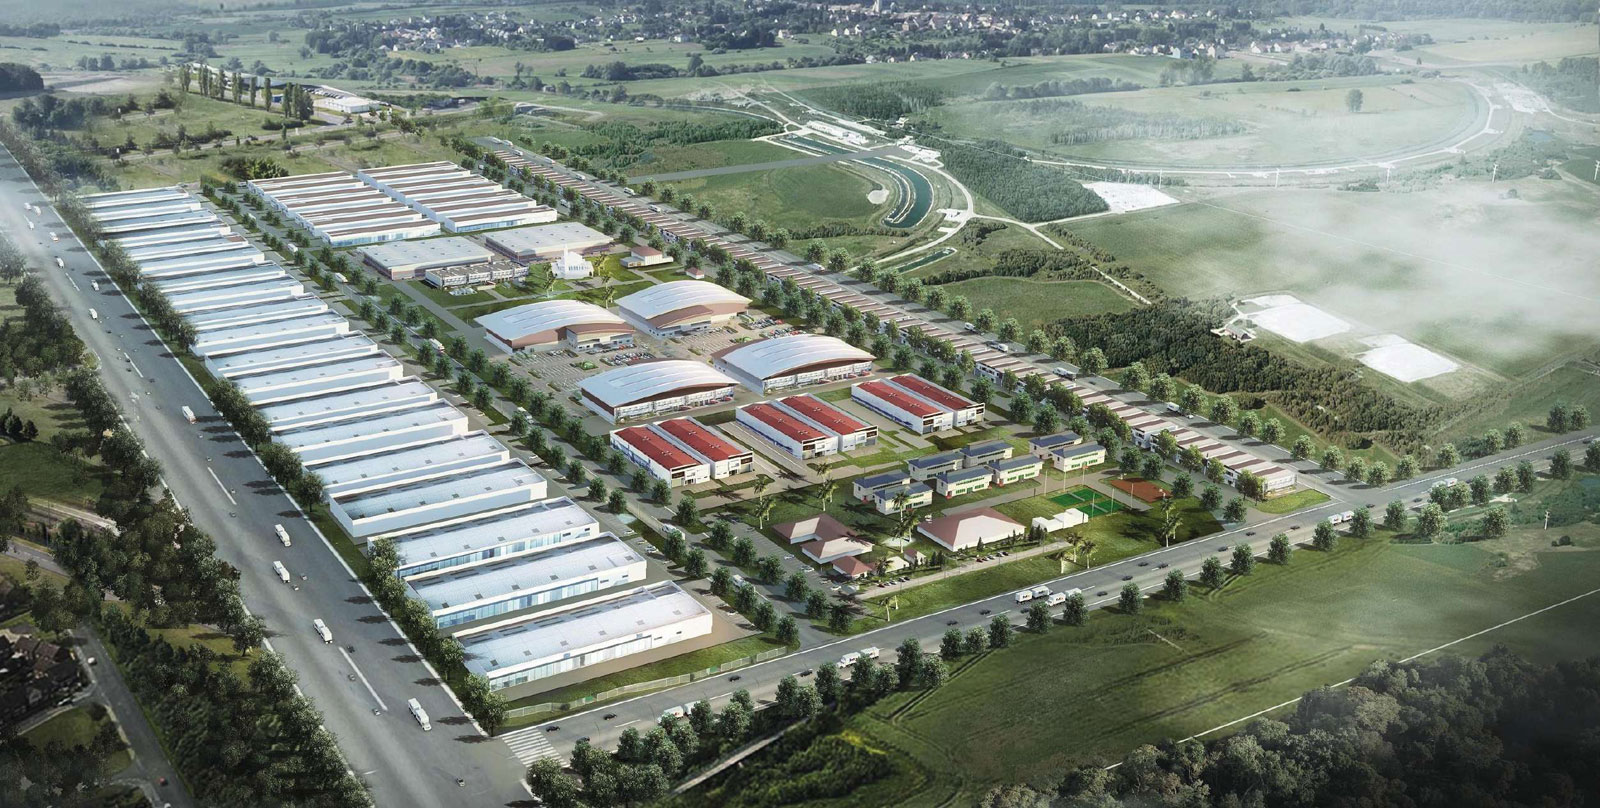 Industrial parks development shall facilitate attracting investments to Ukraine